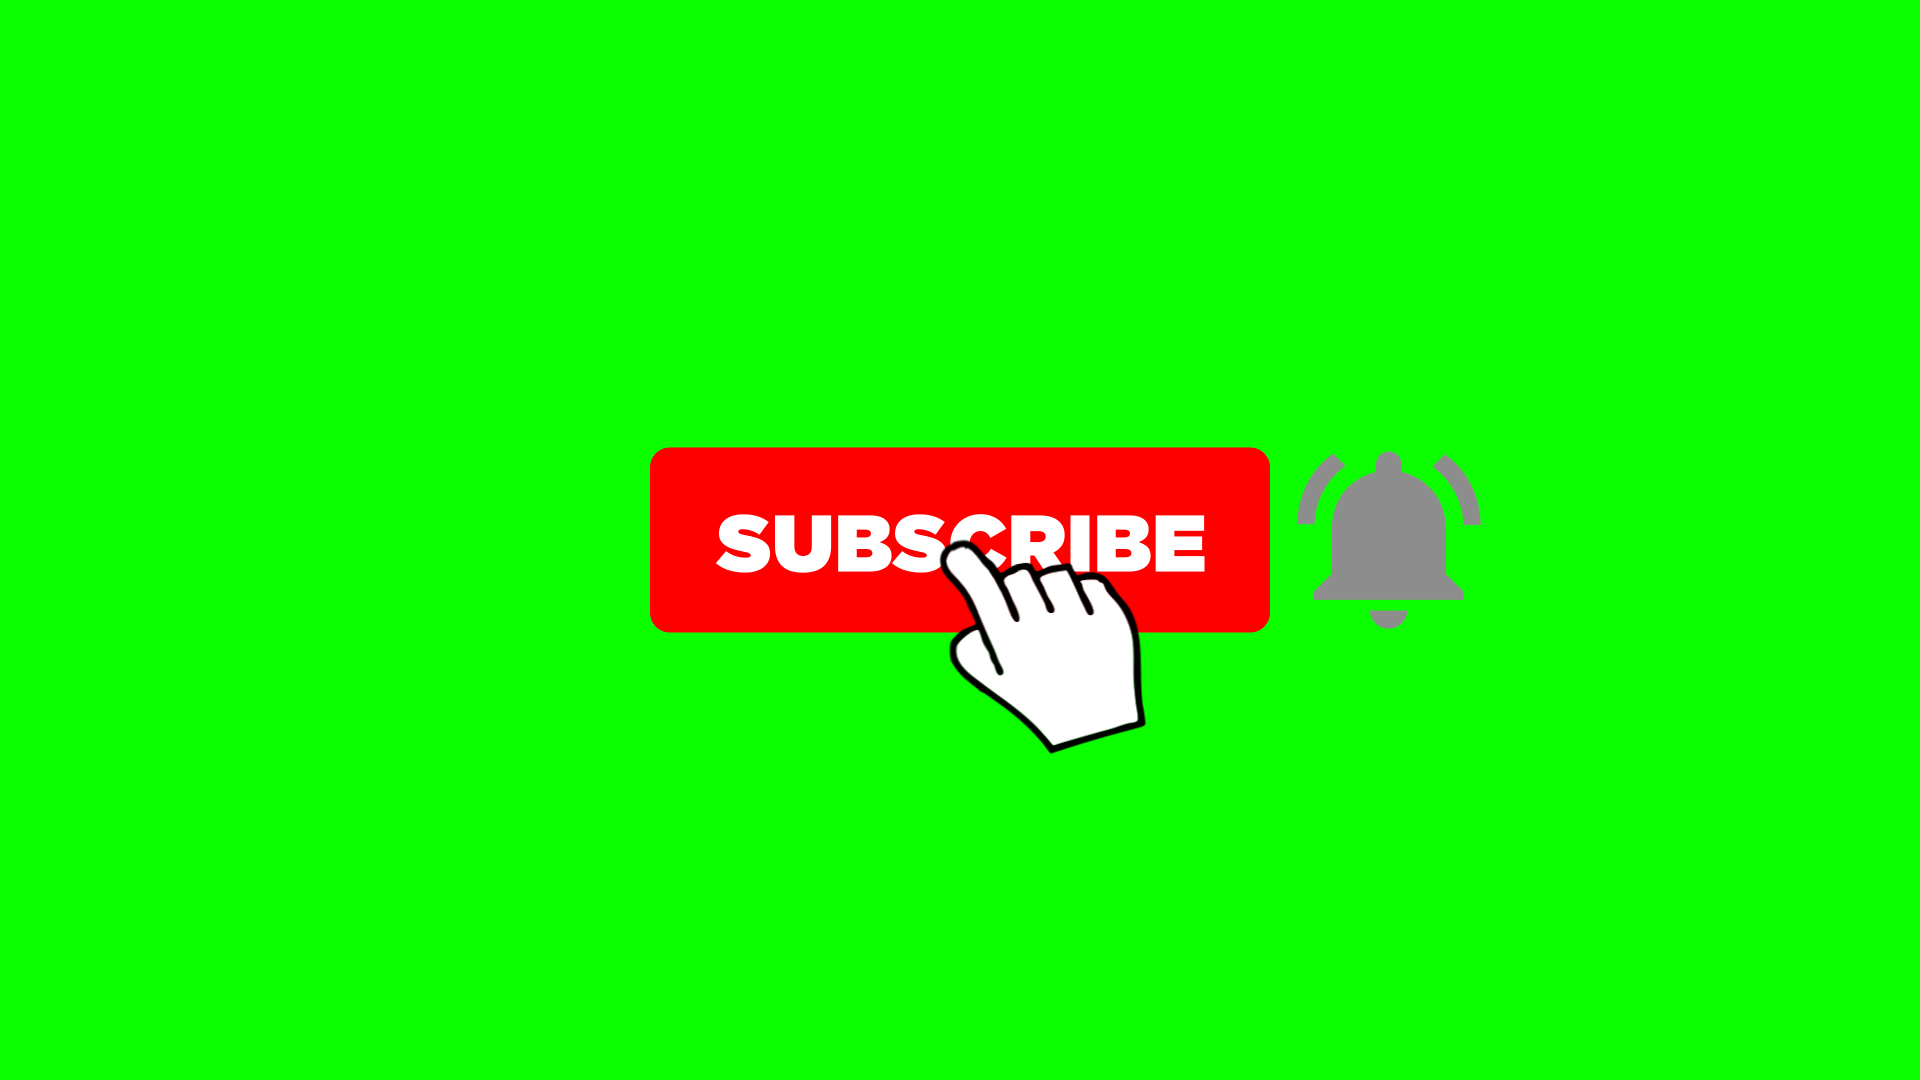 Youtube Subscribe Template Green Screen